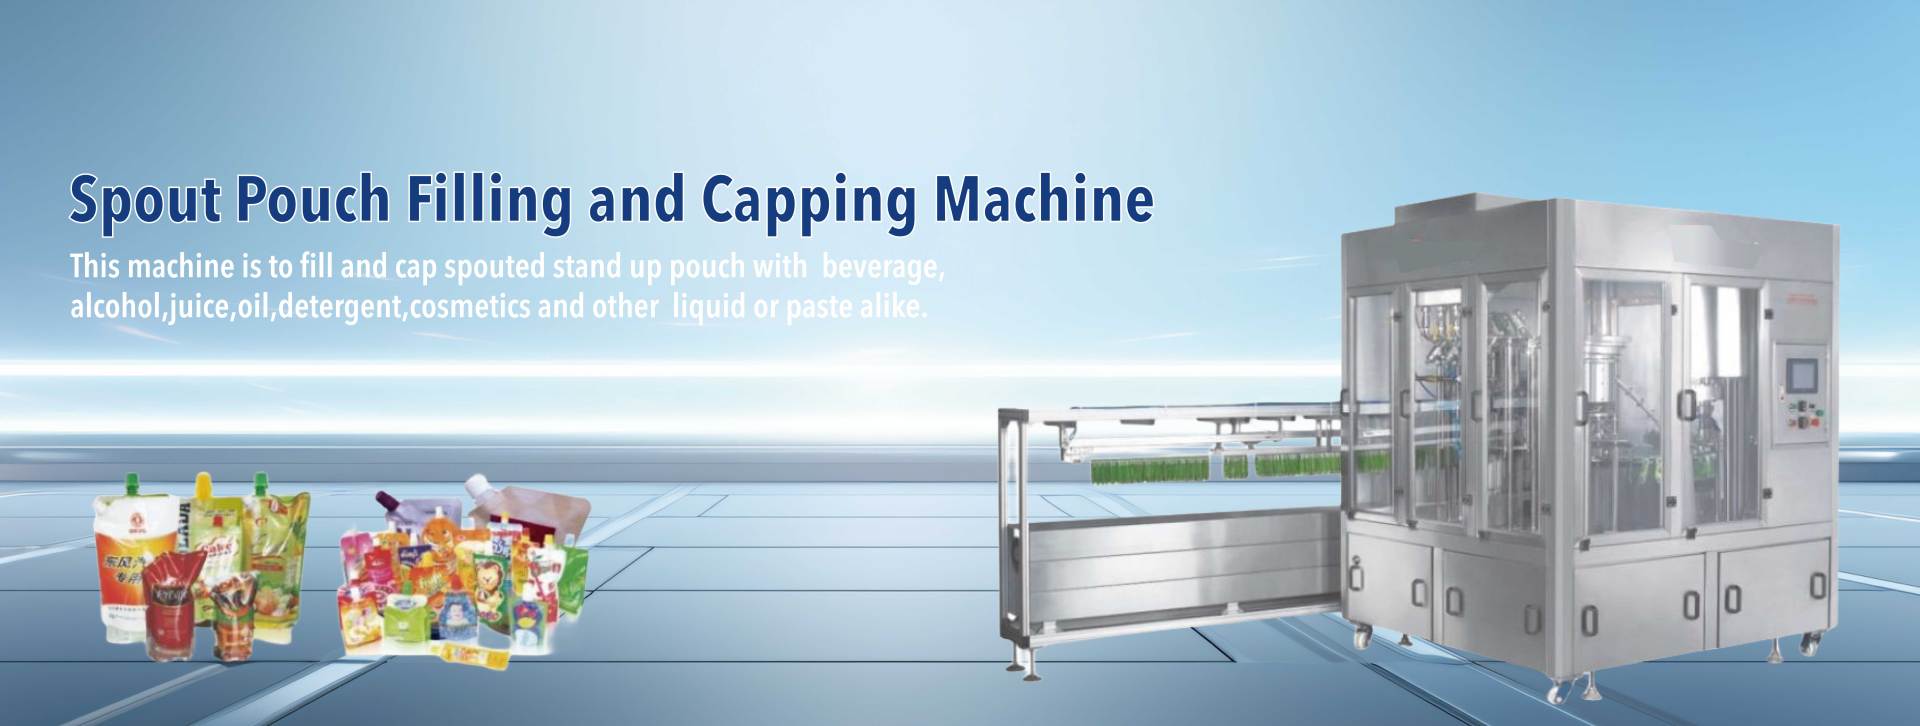 Spout Pouch Filling and Capping Machine,This machine is to fill and cap spouted stand up pounch with beverage,alcohol,juice,oil,detergent,cosmetics and other liquid or paste alike.